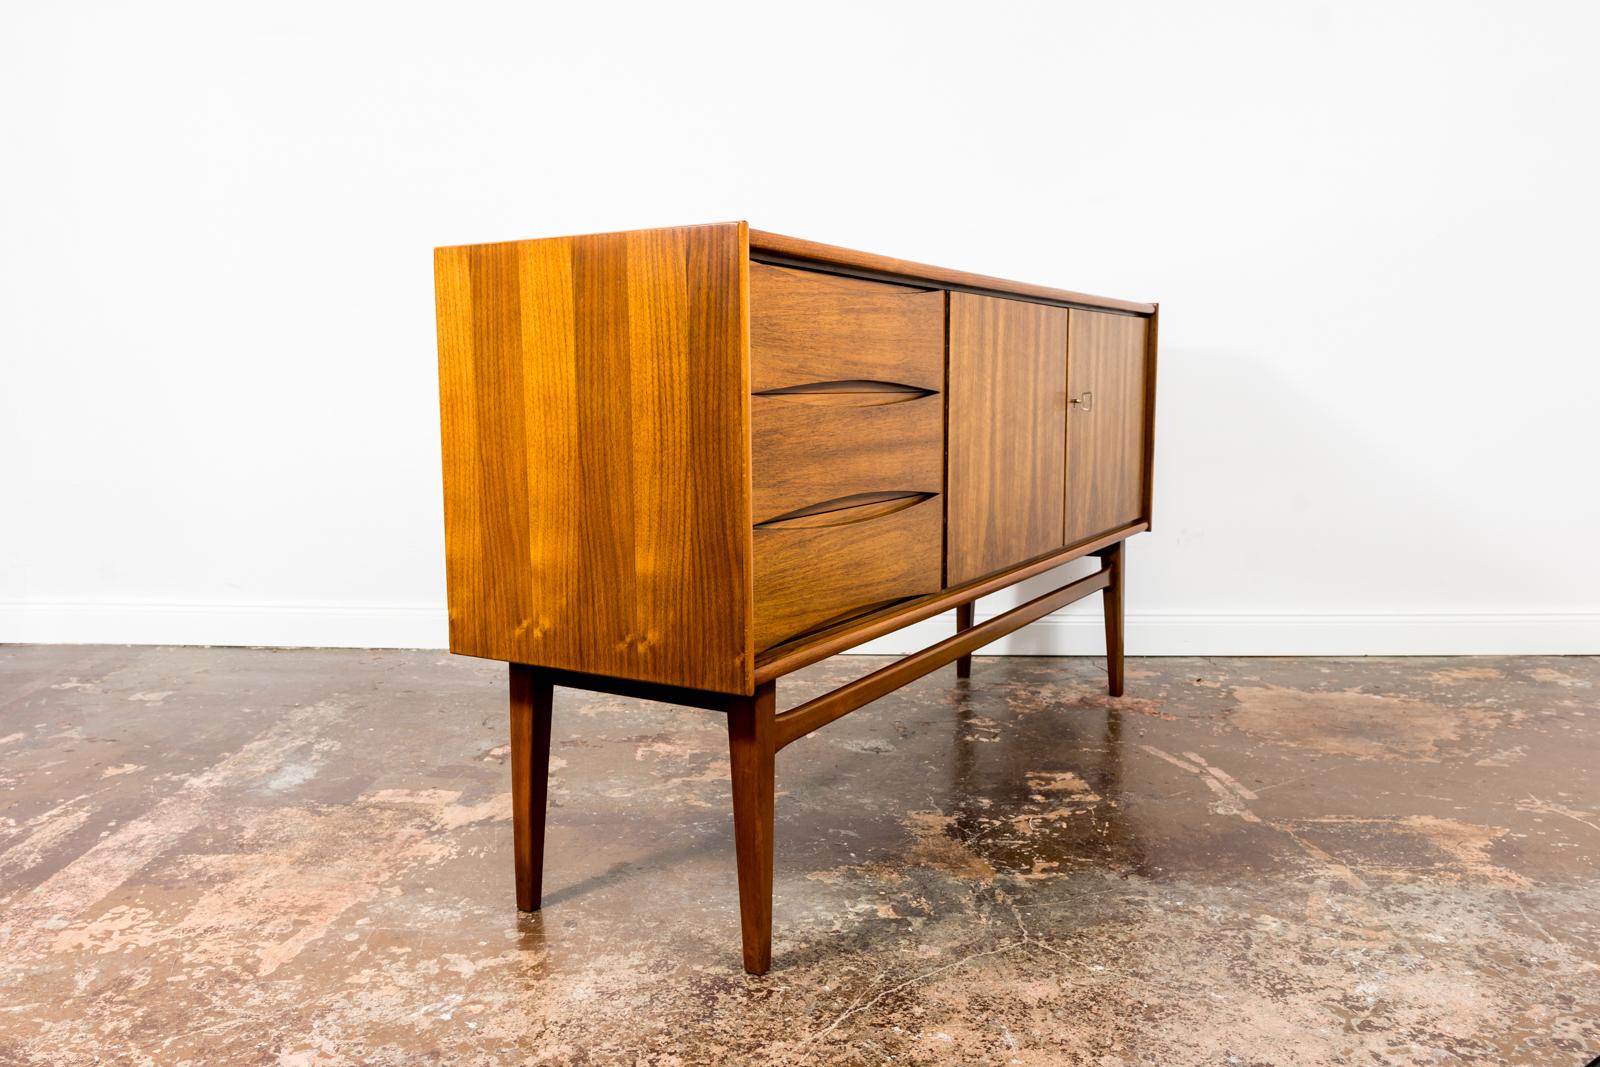 Walnut veneer Mid-Century sideboard from Bydgoskie Furniture Factory, Poland 1960s
This item has 2 doors, 1 long shelf and 3 drawer. ( top is cutlery drawer)
Case raised on solid wooden construction and legs.
Sideboard have been completely restored